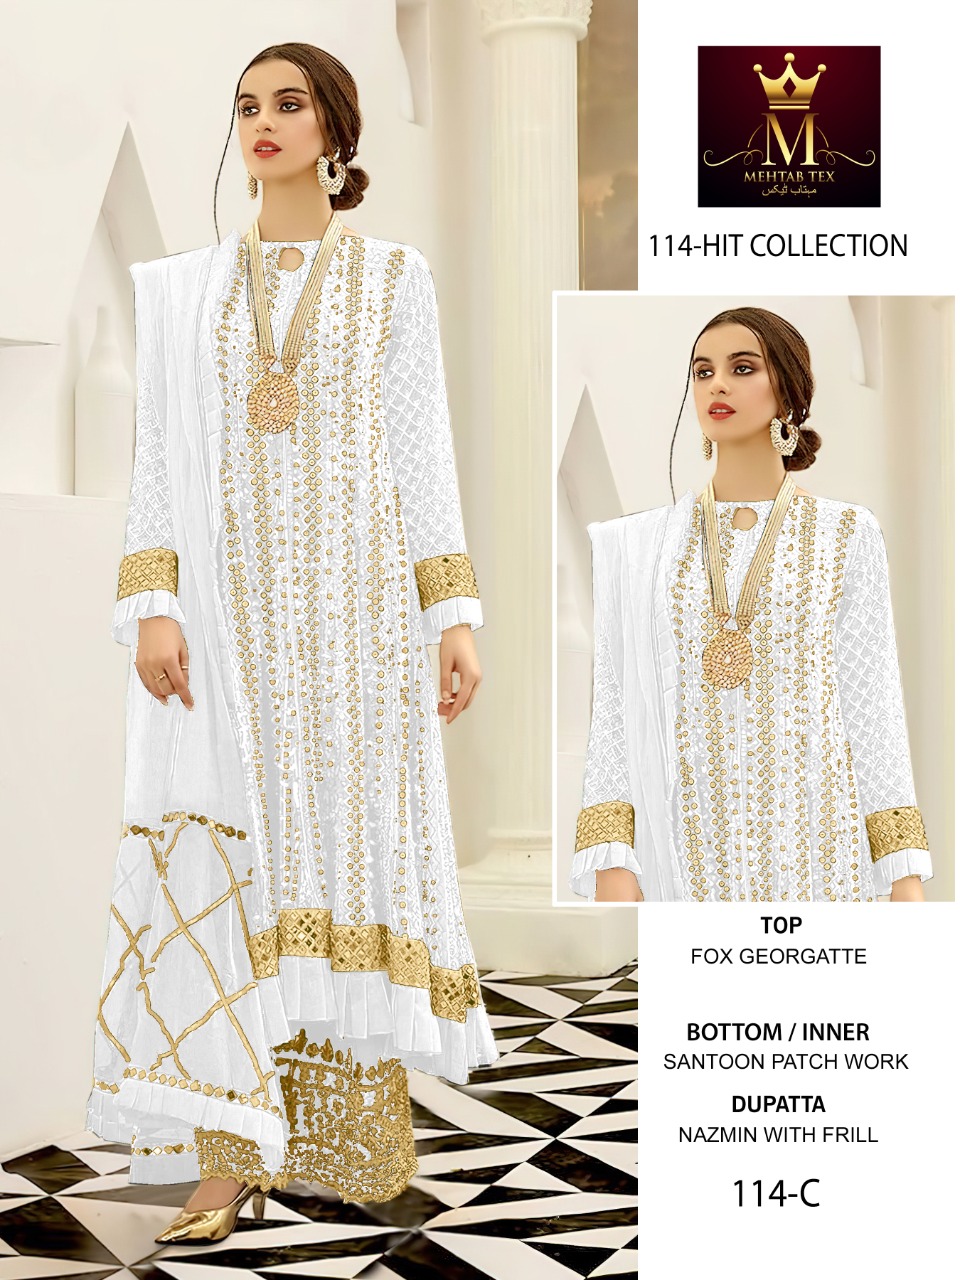 Mehtab Tex Hit Collection 114-C